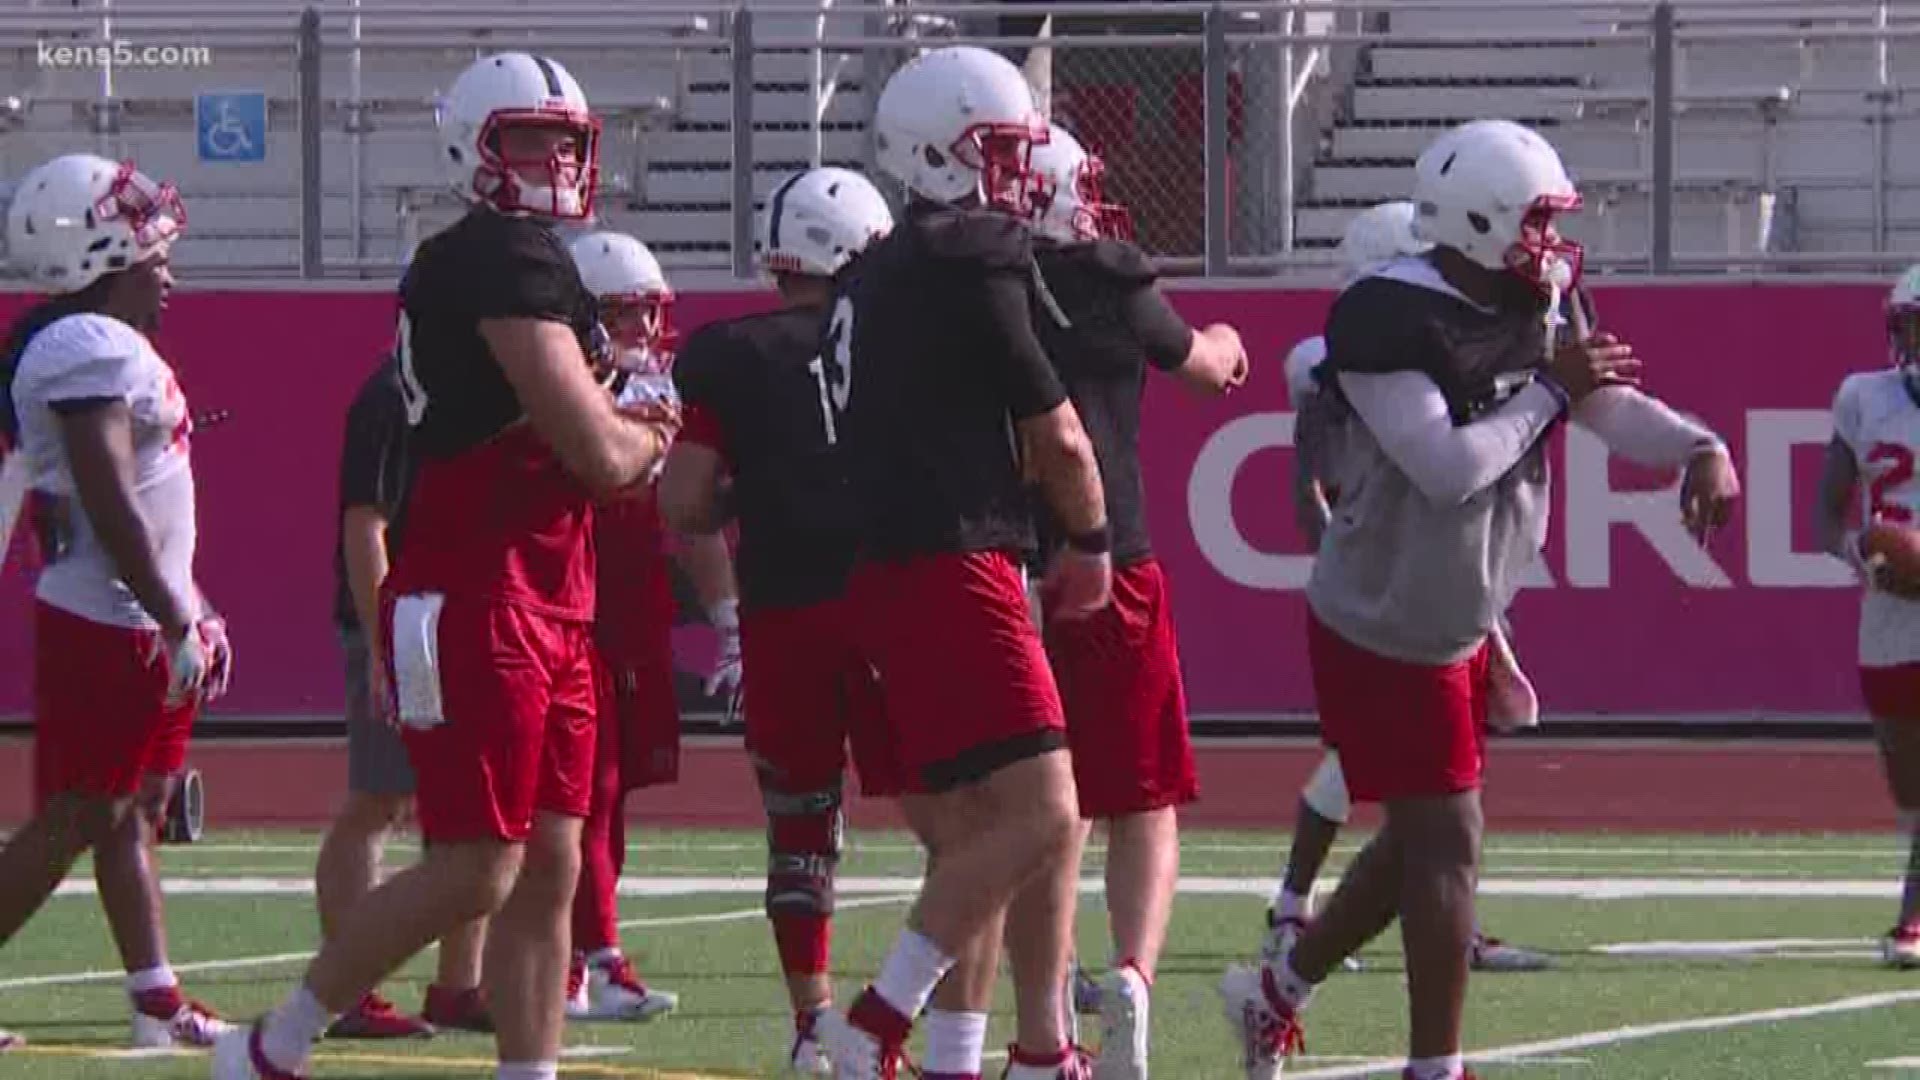 Next weekend, everyone takes the field, including UIW heading to the Alamodome against UTSA.